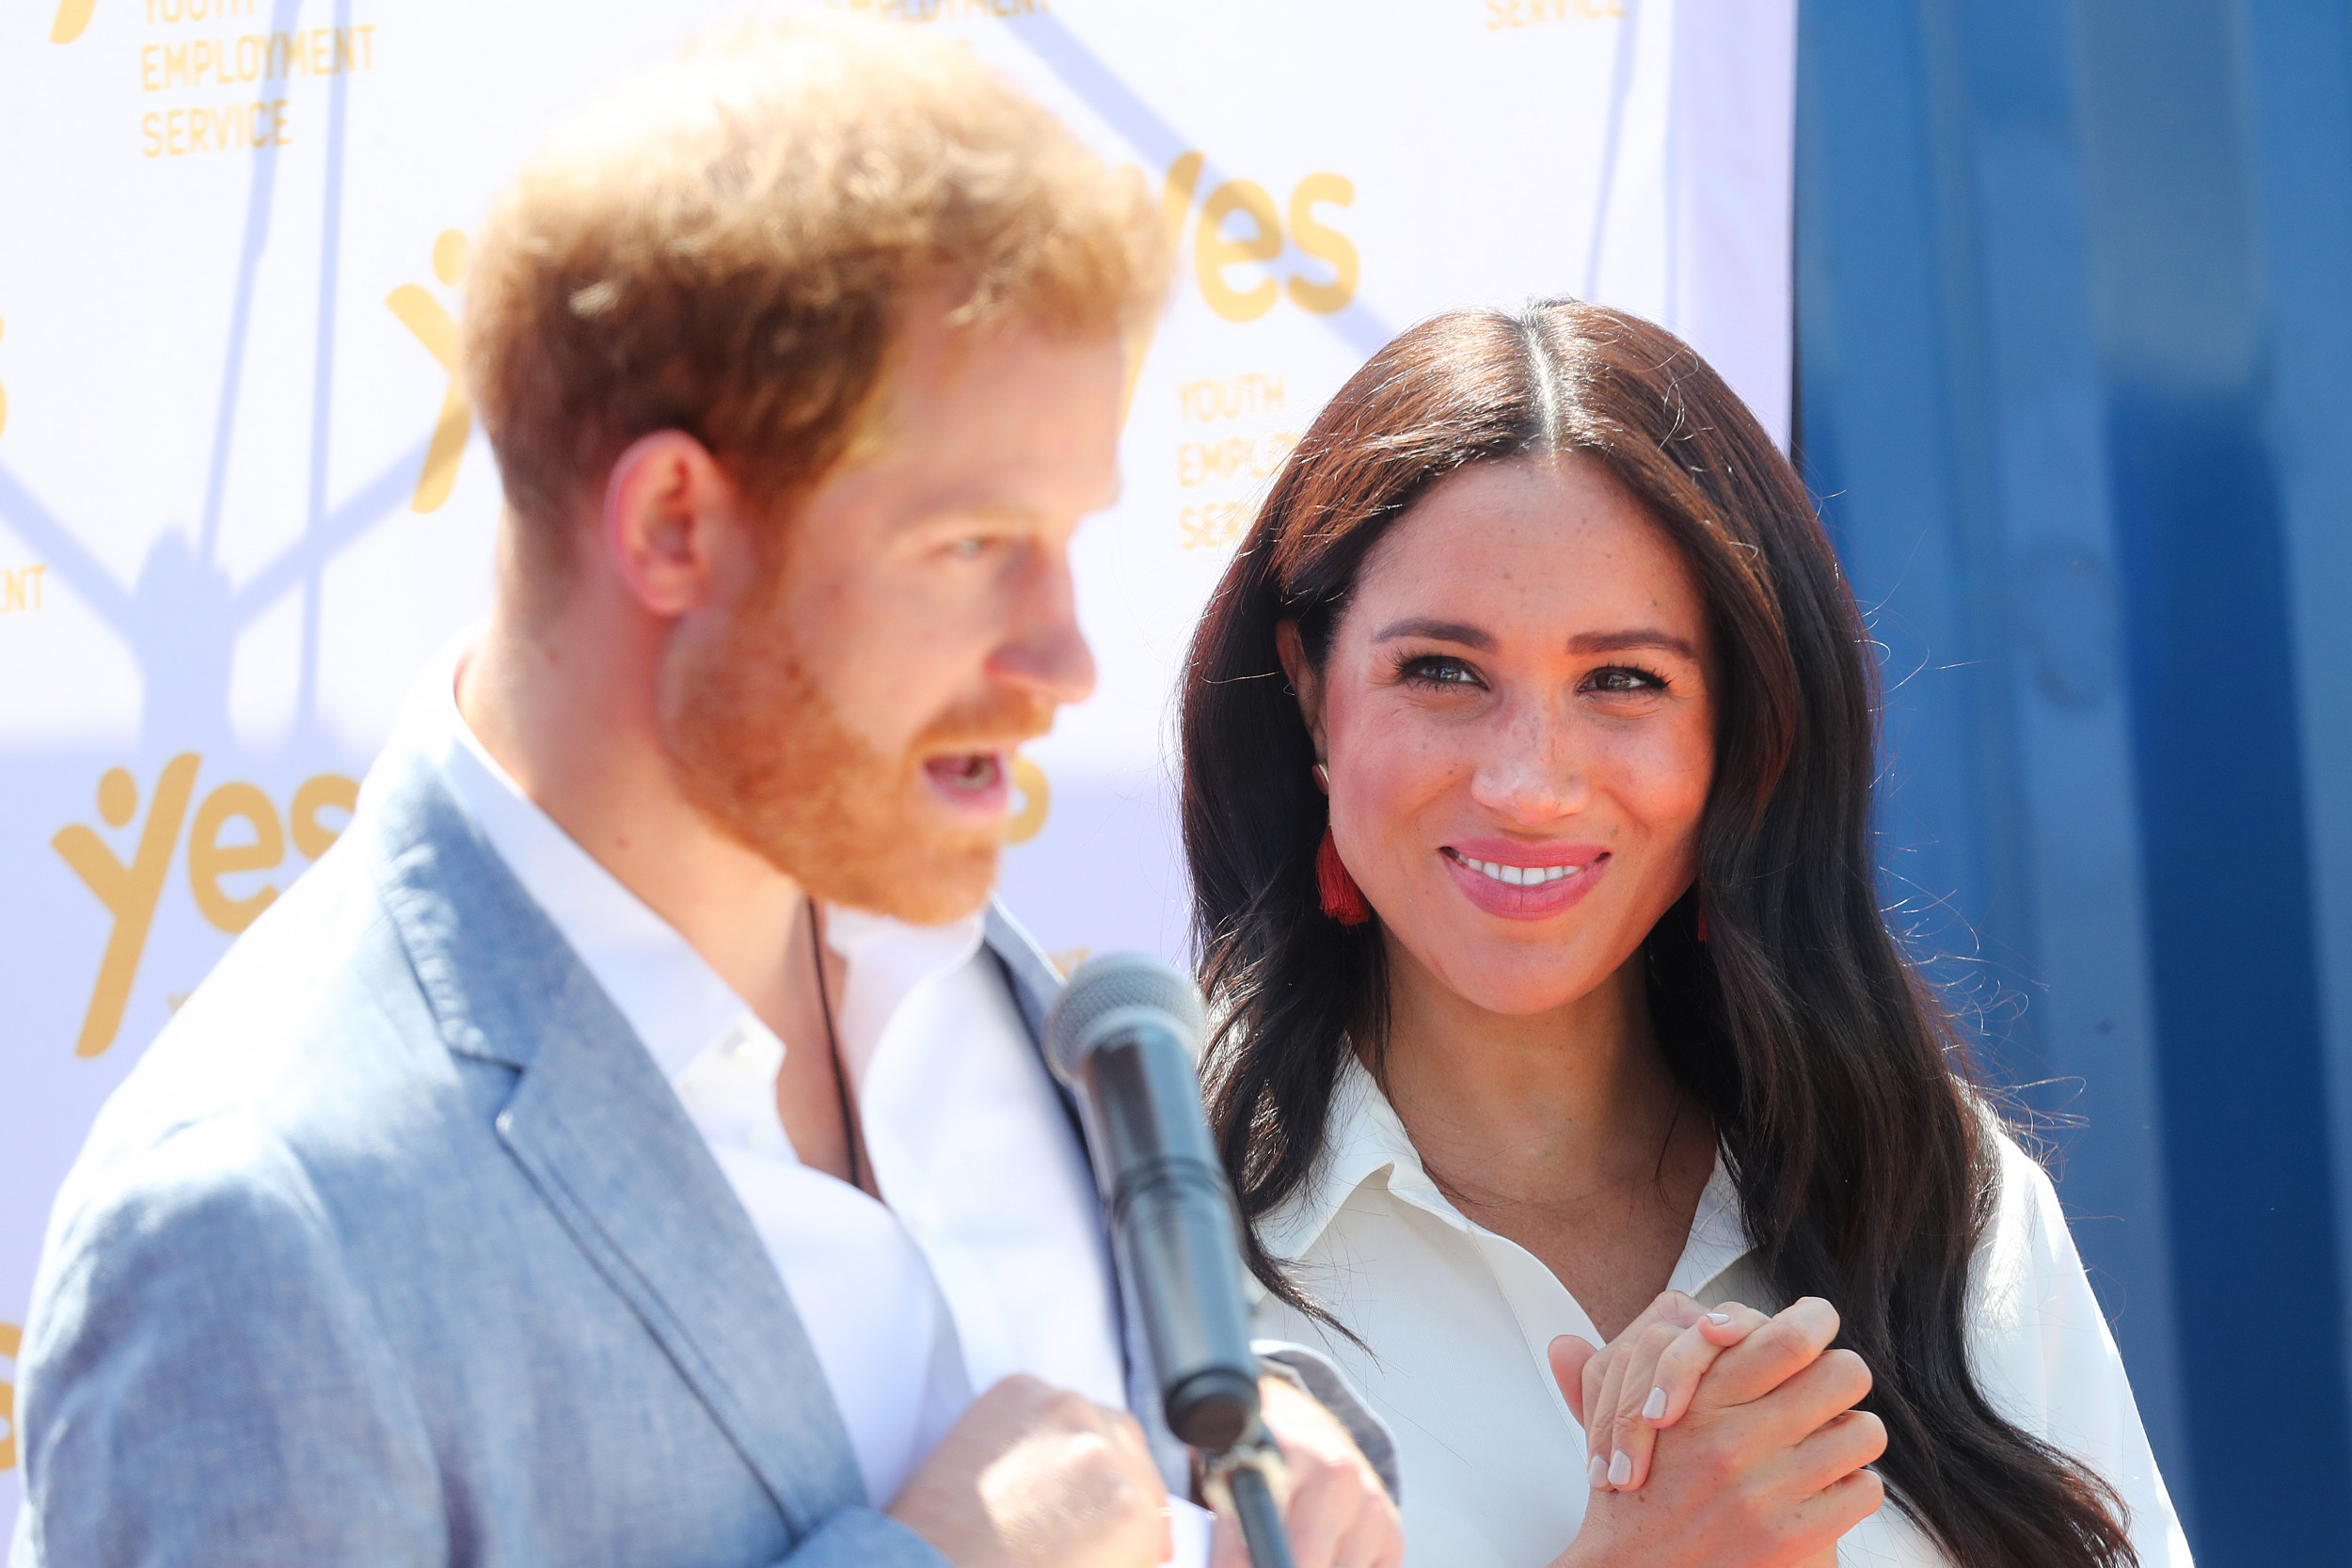 Meghan Markle's Racism Claims Not Aired in 12 Countries Where Queen is Sovereign